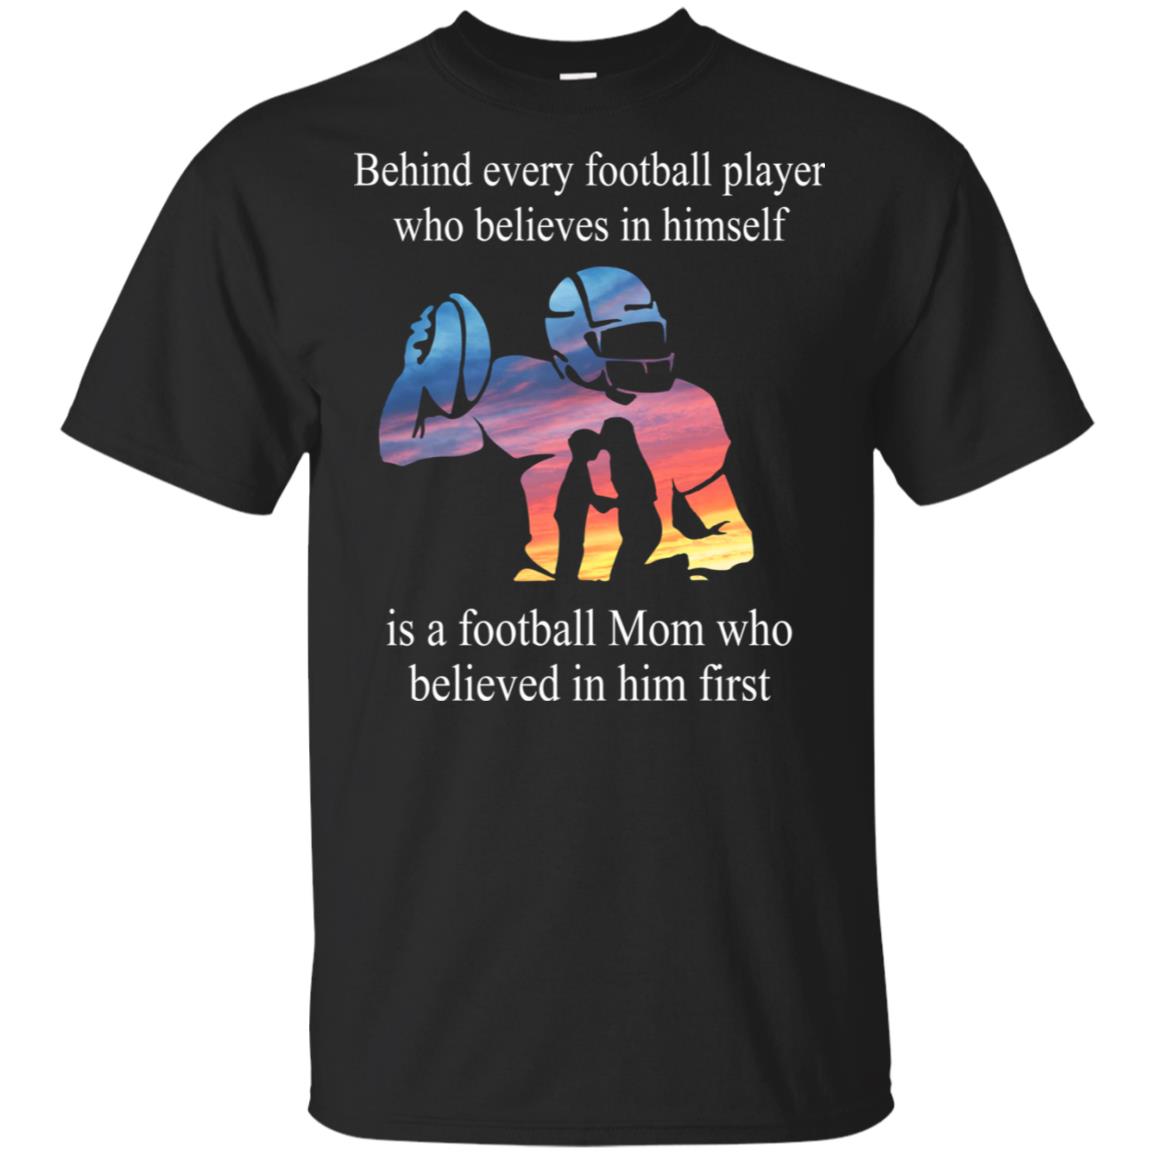 Behind every football player who believes in himself shirt ...